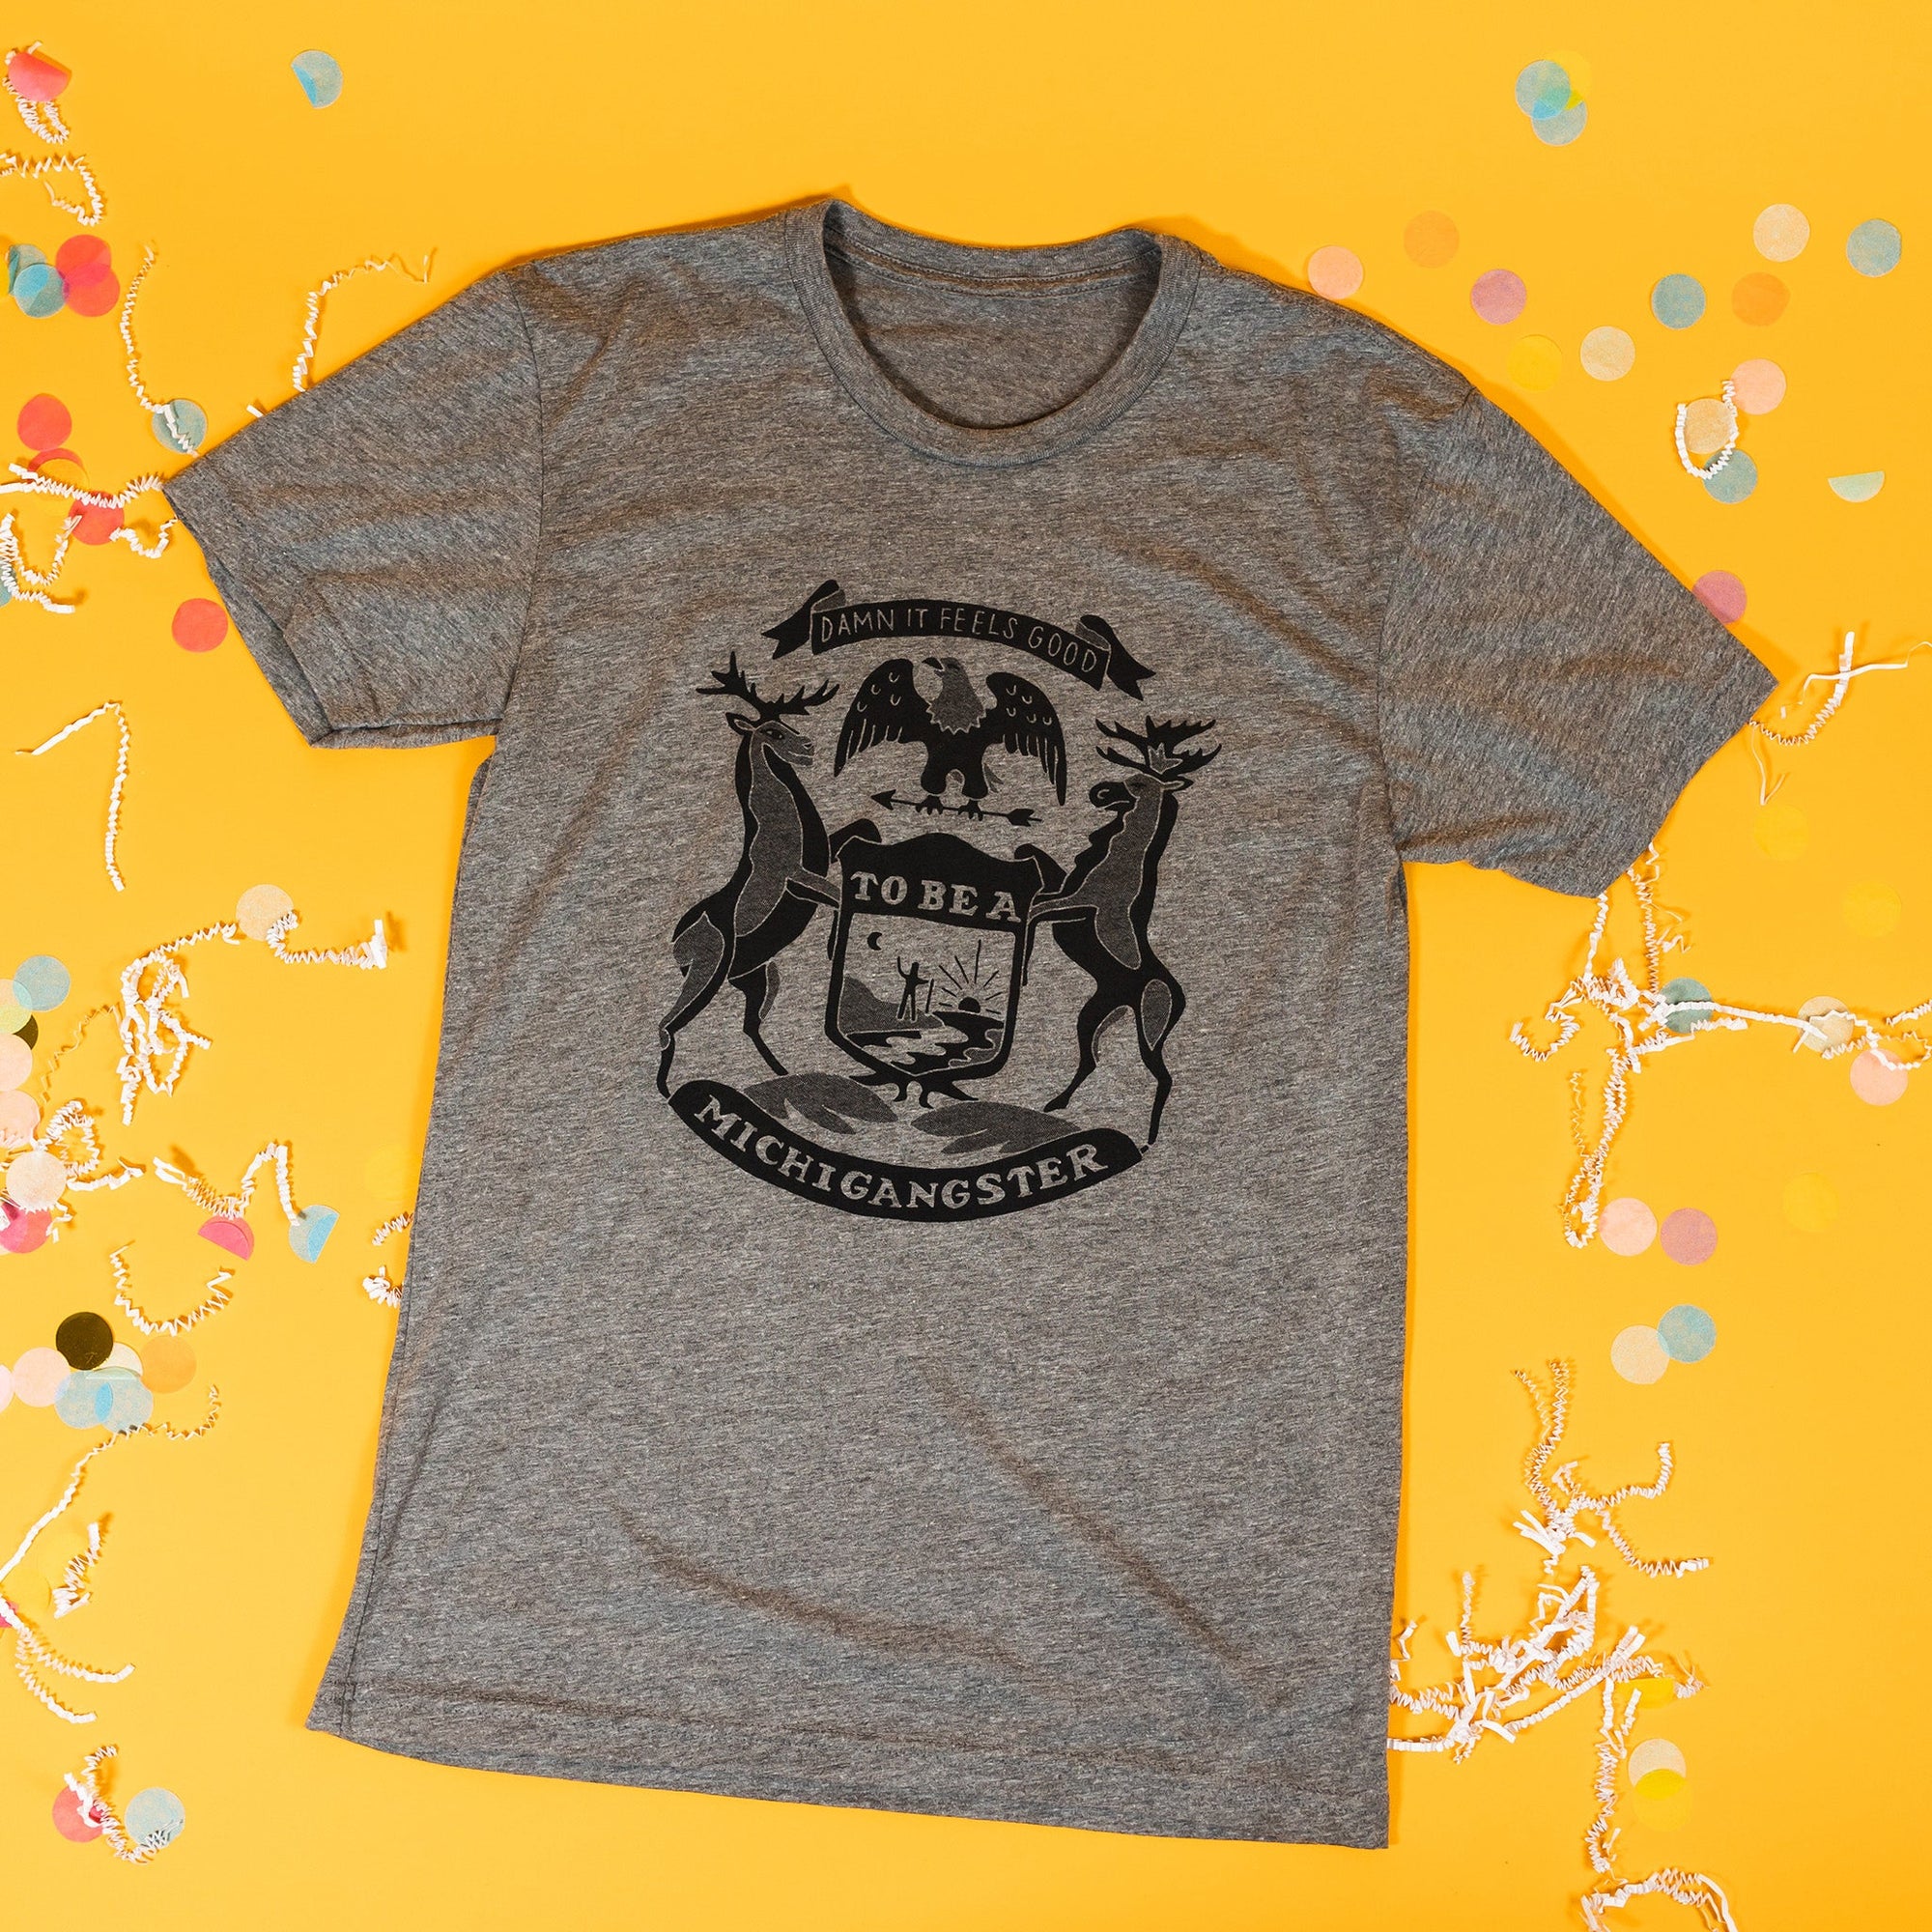 On a sunny mustard background sits a t-shirt with white crinkle and big, colorful confetti scattered around. This heather grey tee features hand lettering and custom illustrations of a modern, lighthearted take on the flag of Michigan. It is in black ink.